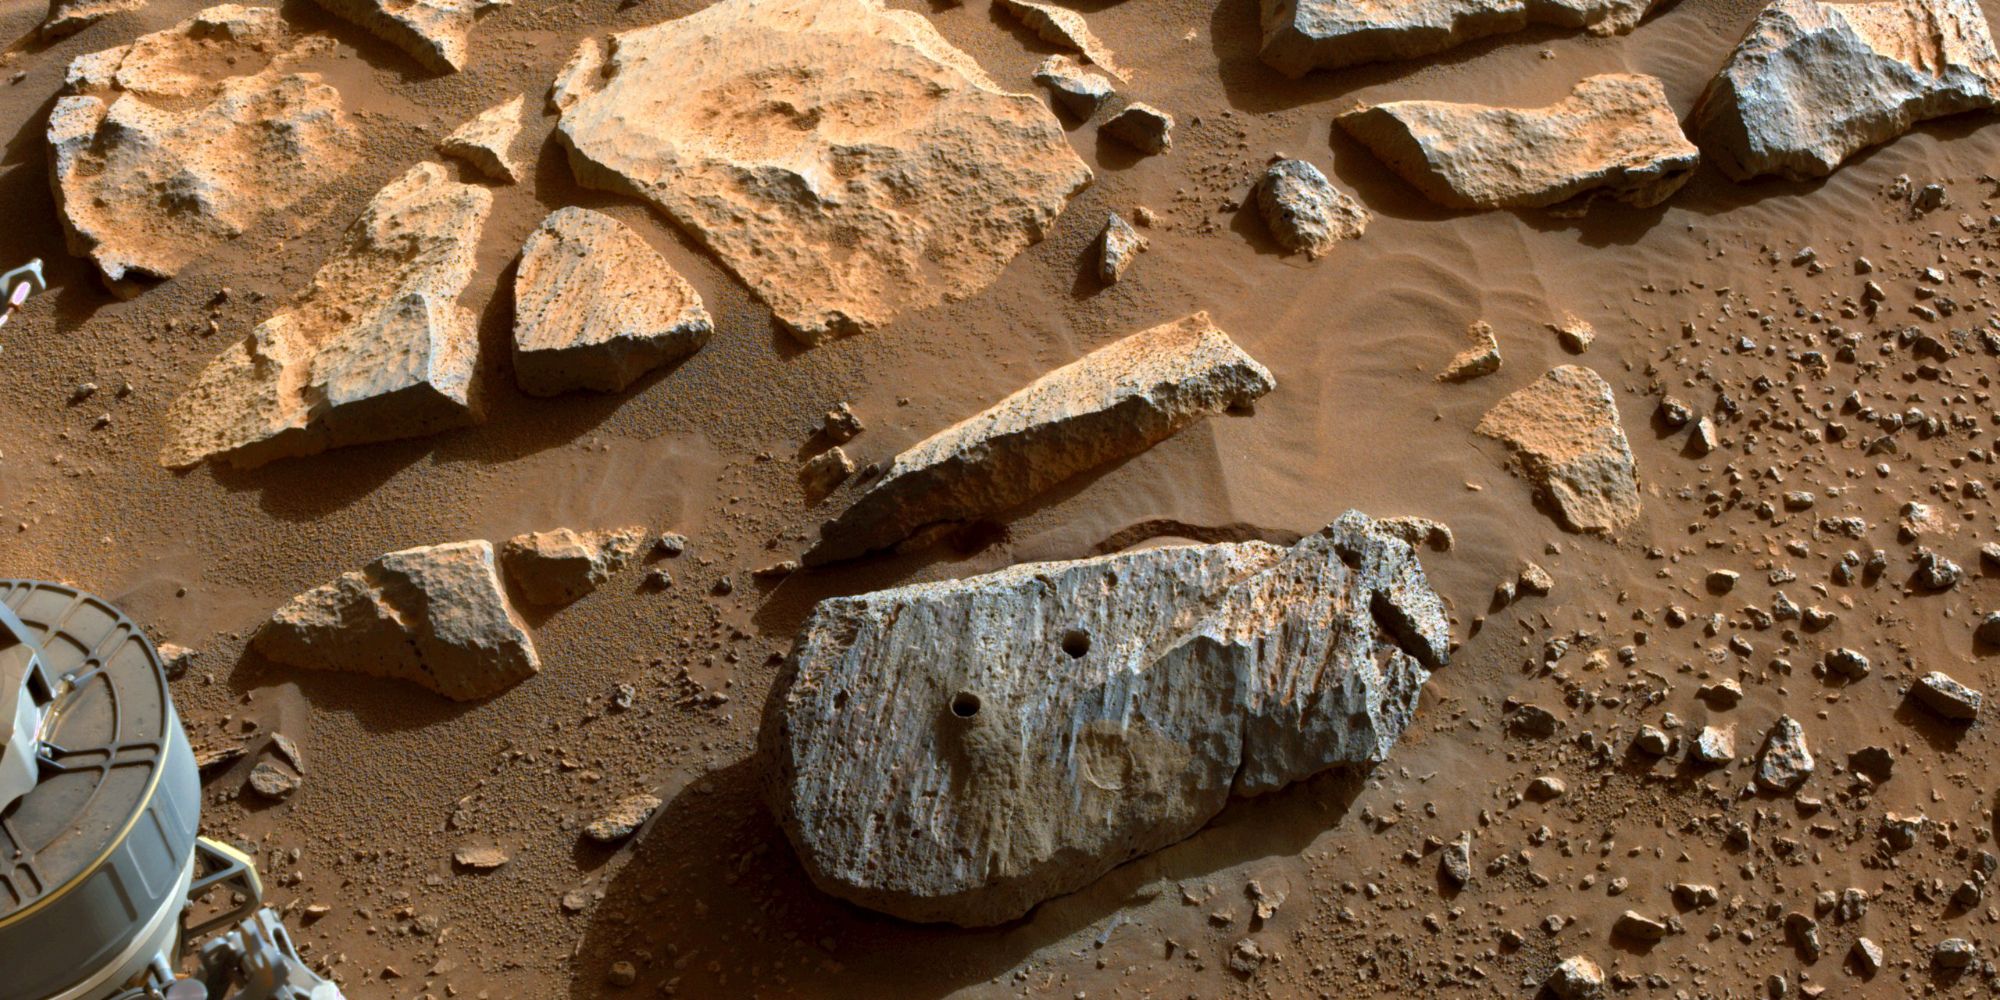 Rocks drilled into by NASA's Perseverance rover on Mars